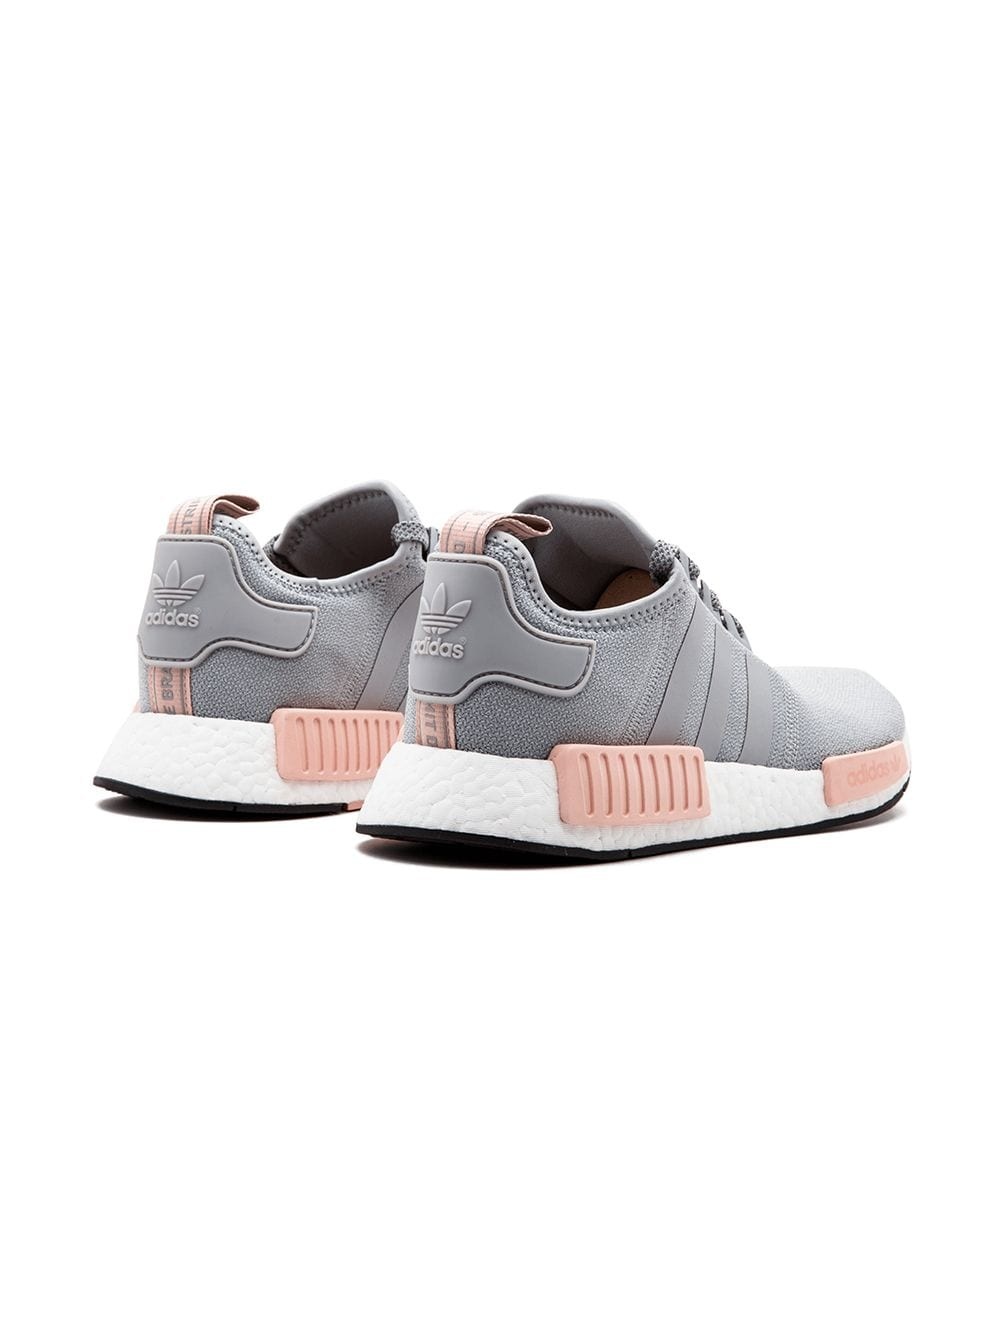 NMD_R1 W sneakers - 3